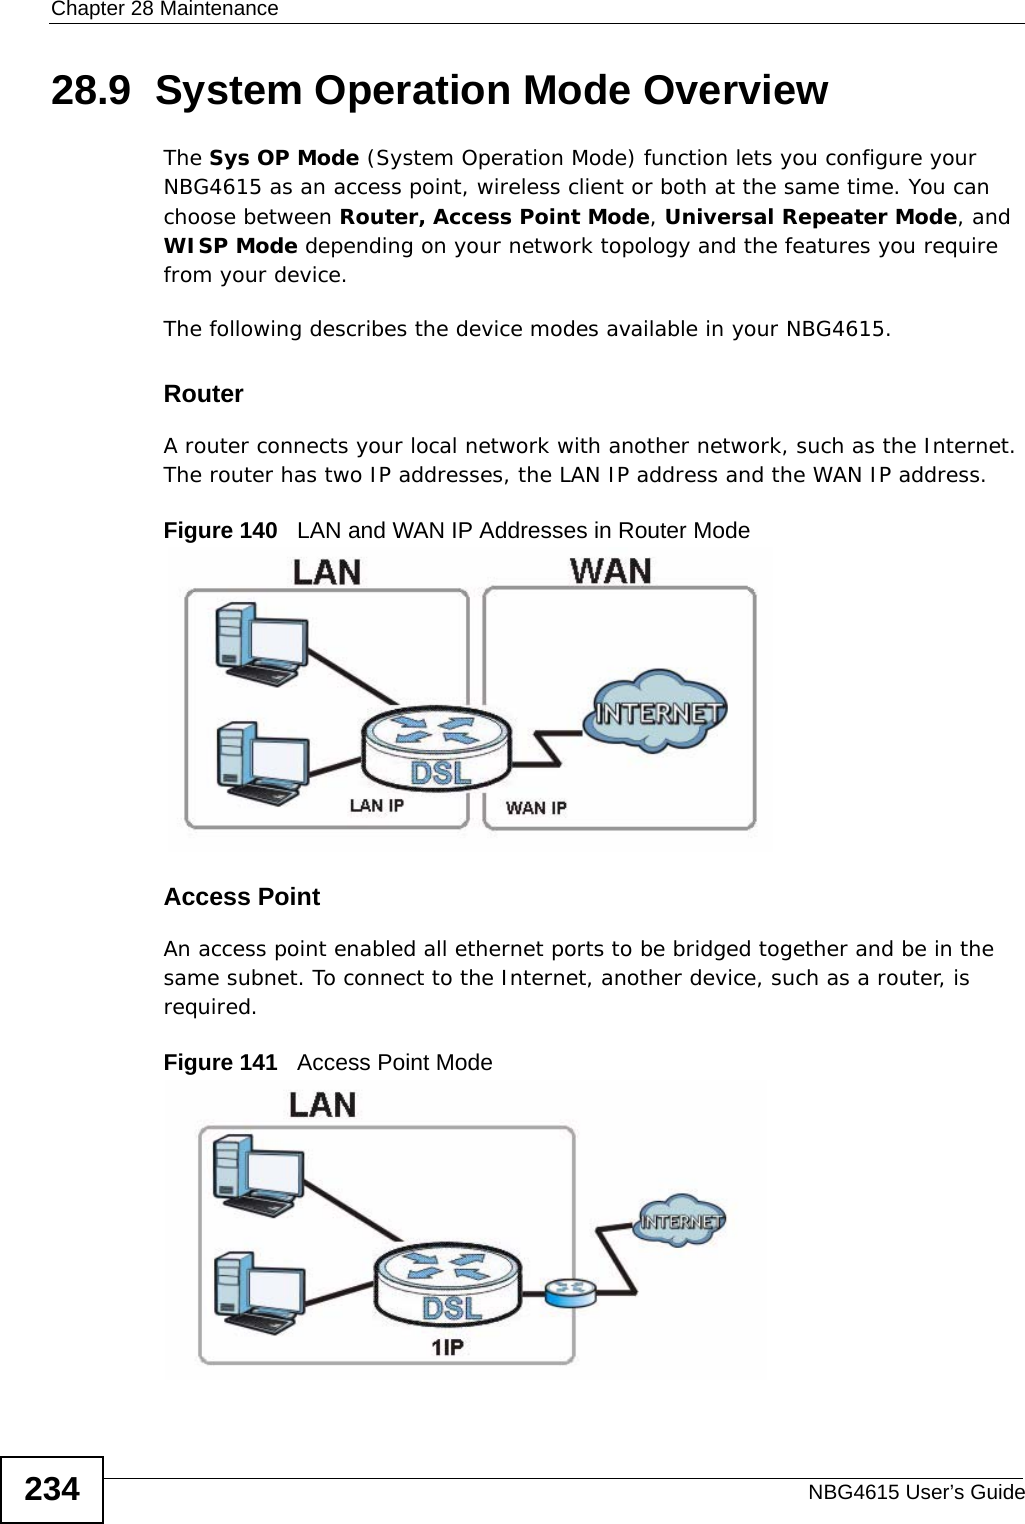 Chapter 28 MaintenanceNBG4615 User’s Guide23428.9  System Operation Mode OverviewThe Sys OP Mode (System Operation Mode) function lets you configure your NBG4615 as an access point, wireless client or both at the same time. You can choose between Router, Access Point Mode, Universal Repeater Mode, and WISP Mode depending on your network topology and the features you require from your device. The following describes the device modes available in your NBG4615.RouterA router connects your local network with another network, such as the Internet. The router has two IP addresses, the LAN IP address and the WAN IP address.Figure 140   LAN and WAN IP Addresses in Router ModeAccess PointAn access point enabled all ethernet ports to be bridged together and be in the same subnet. To connect to the Internet, another device, such as a router, is required.Figure 141   Access Point Mode